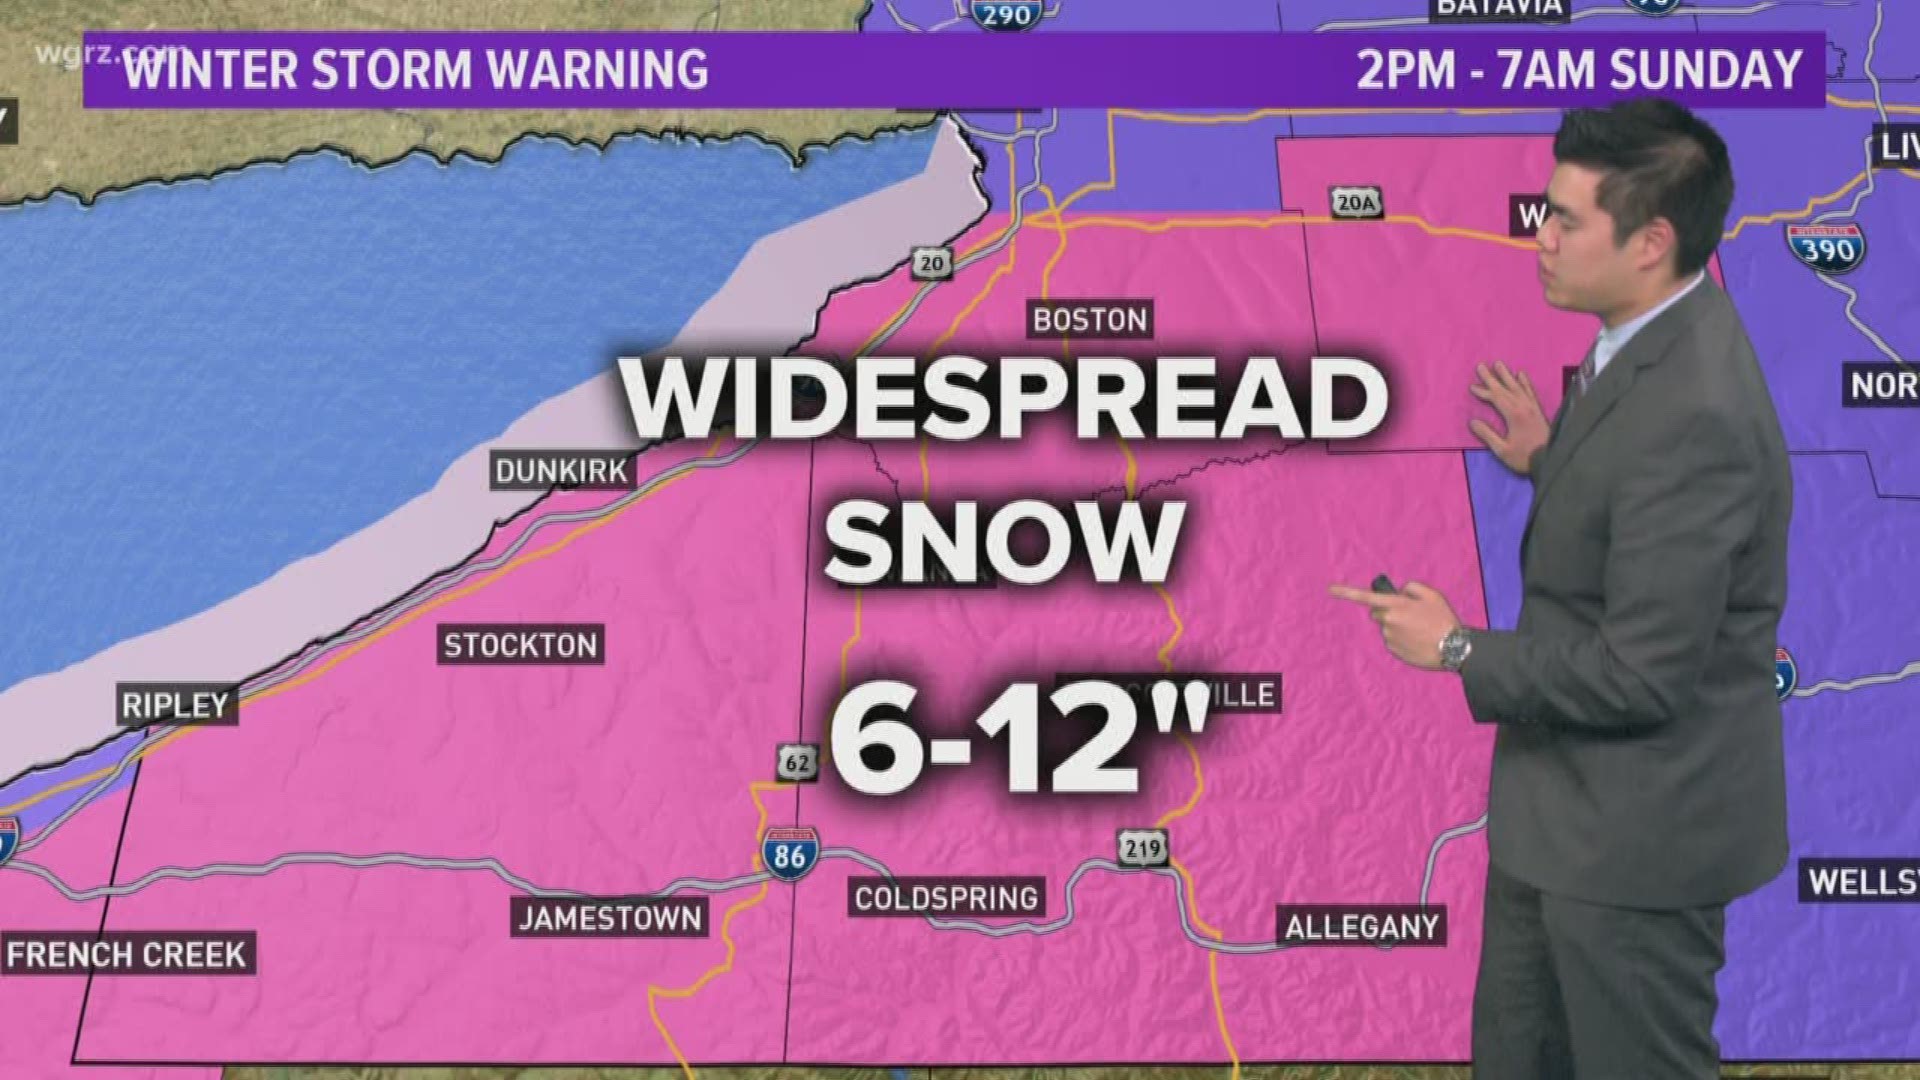 A winter storm warning is in effect for Wyoming, Chautauqua, Cattaaugus, and southern Erie counties from 2 P.M. Saturday until 7 A.M. Sunday..